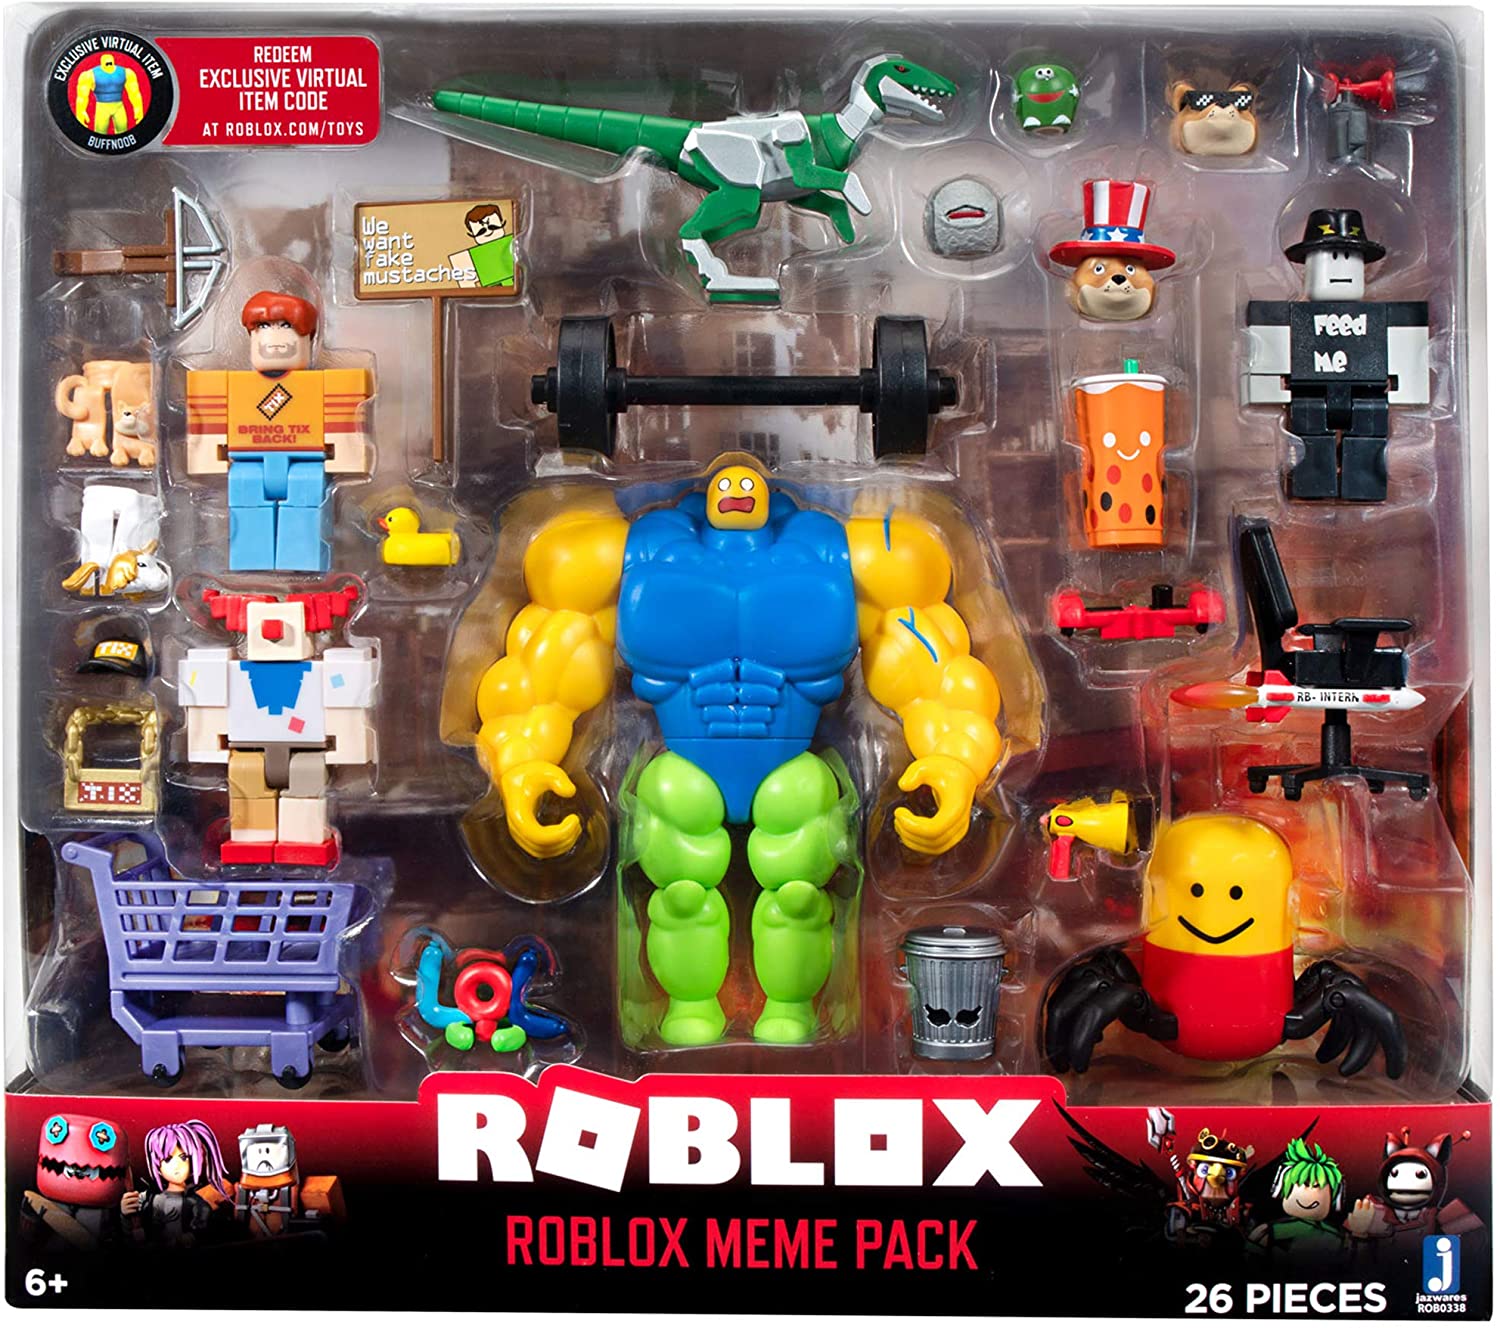 Dueldroid 5000 With Virtual Game Code Accessories Roblox Toys Action Figures Tv Movie Video Games Djroncarpenito Toys Hobbies - roblox generals gun